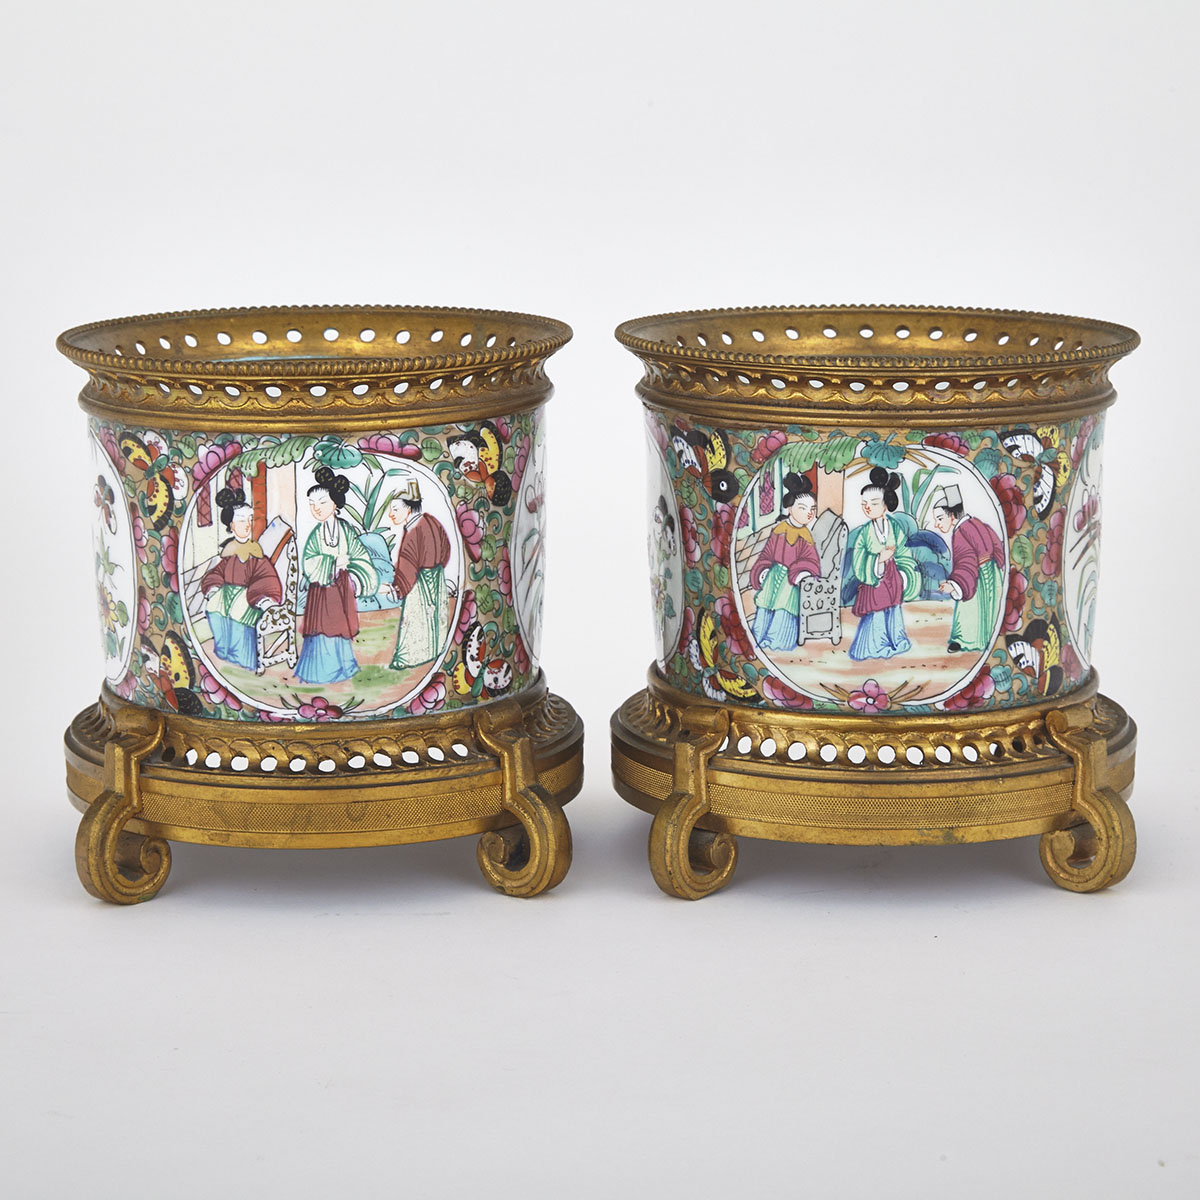 Pair of Ormolu Mounted Chinese Rose Medallion Porcelain Cachepots,  late 19th century